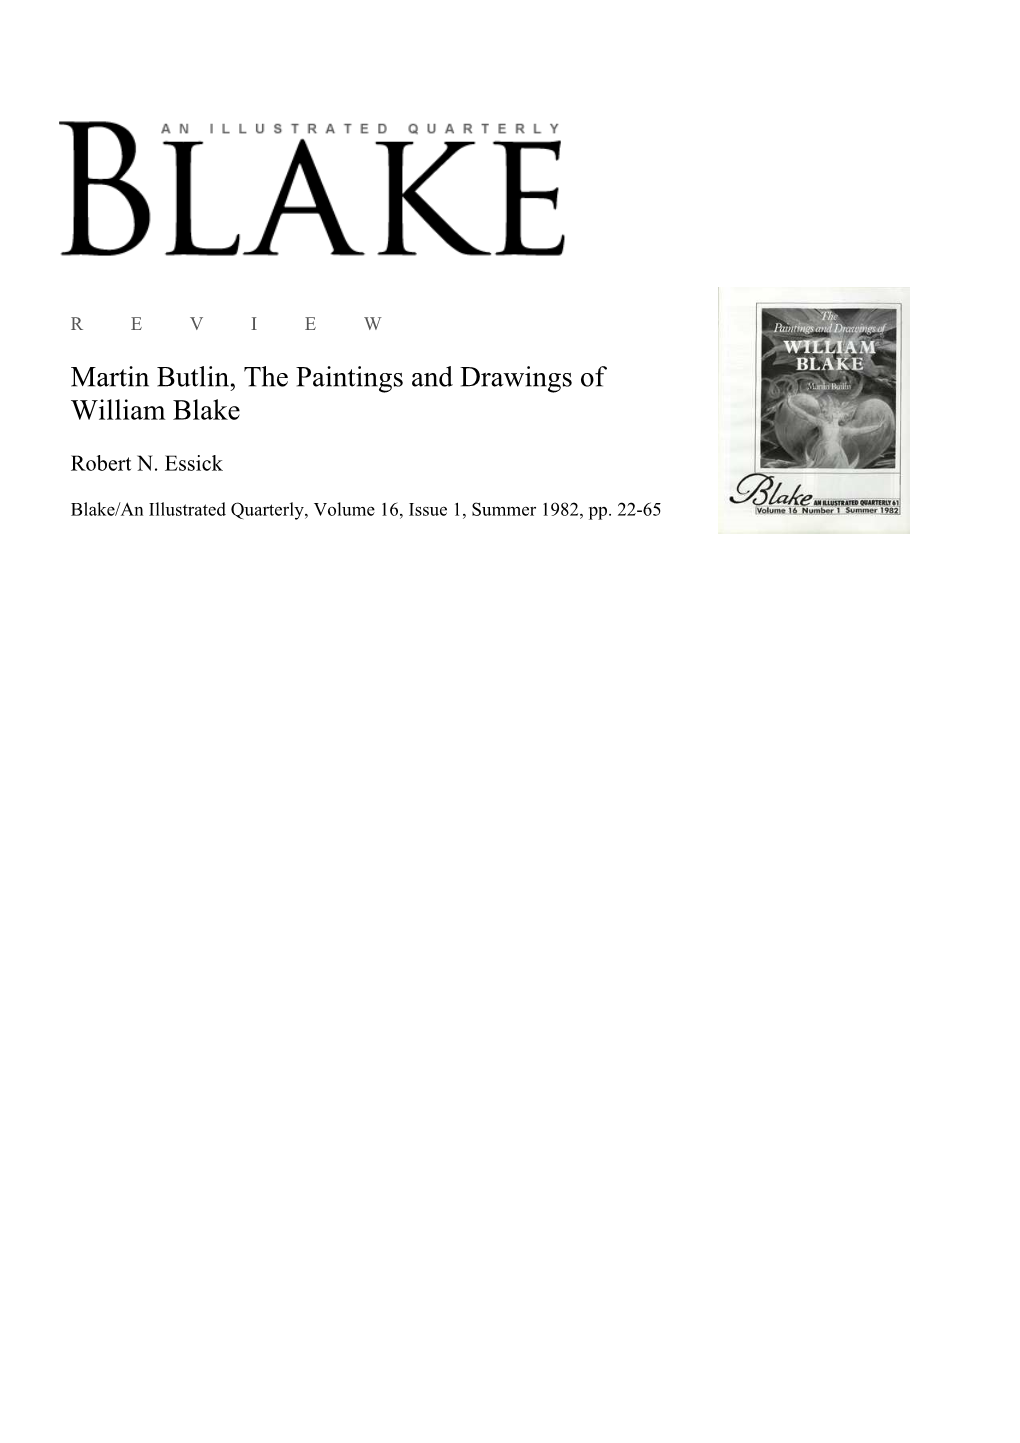 Martin Butlin, the Paintings and Drawings of William Blake